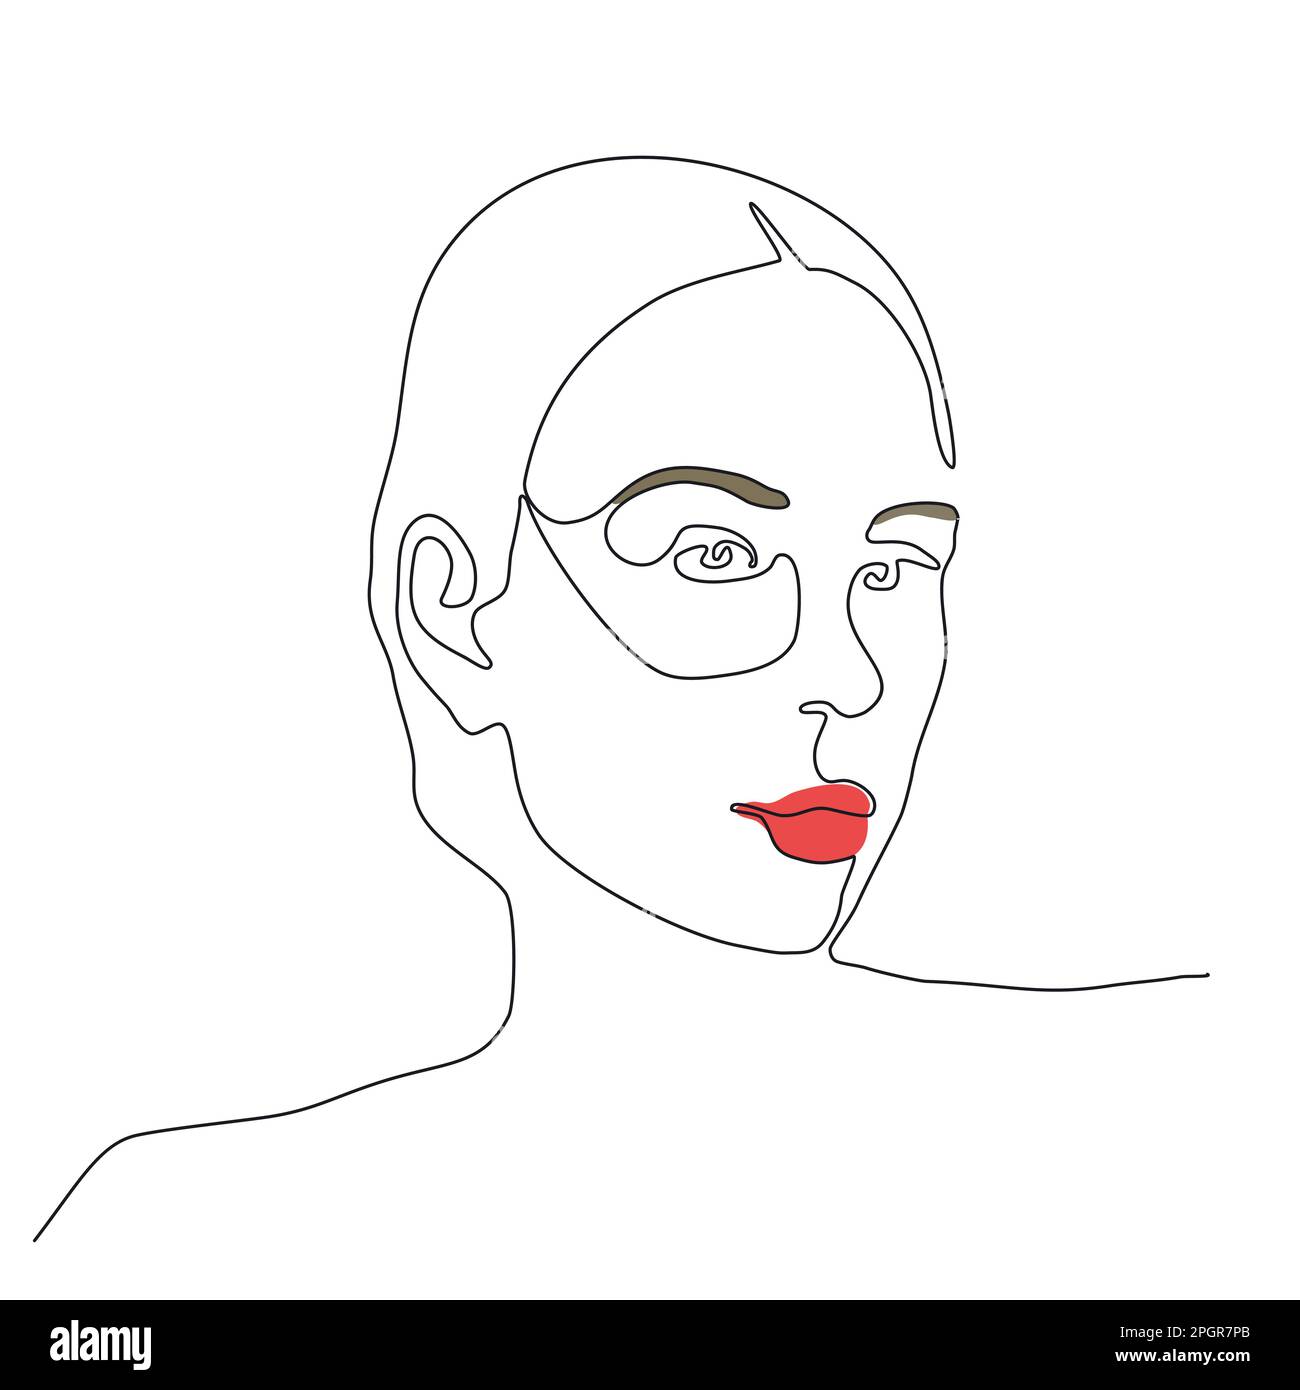 https://c8.alamy.com/comp/2PGR7PB/woman-line-art-minimalist-logo-continuous-drawing-in-one-line-abstract-line-sketch-of-female-face-linear-design-faces-black-white-vector-illustrat-2PGR7PB.jpg